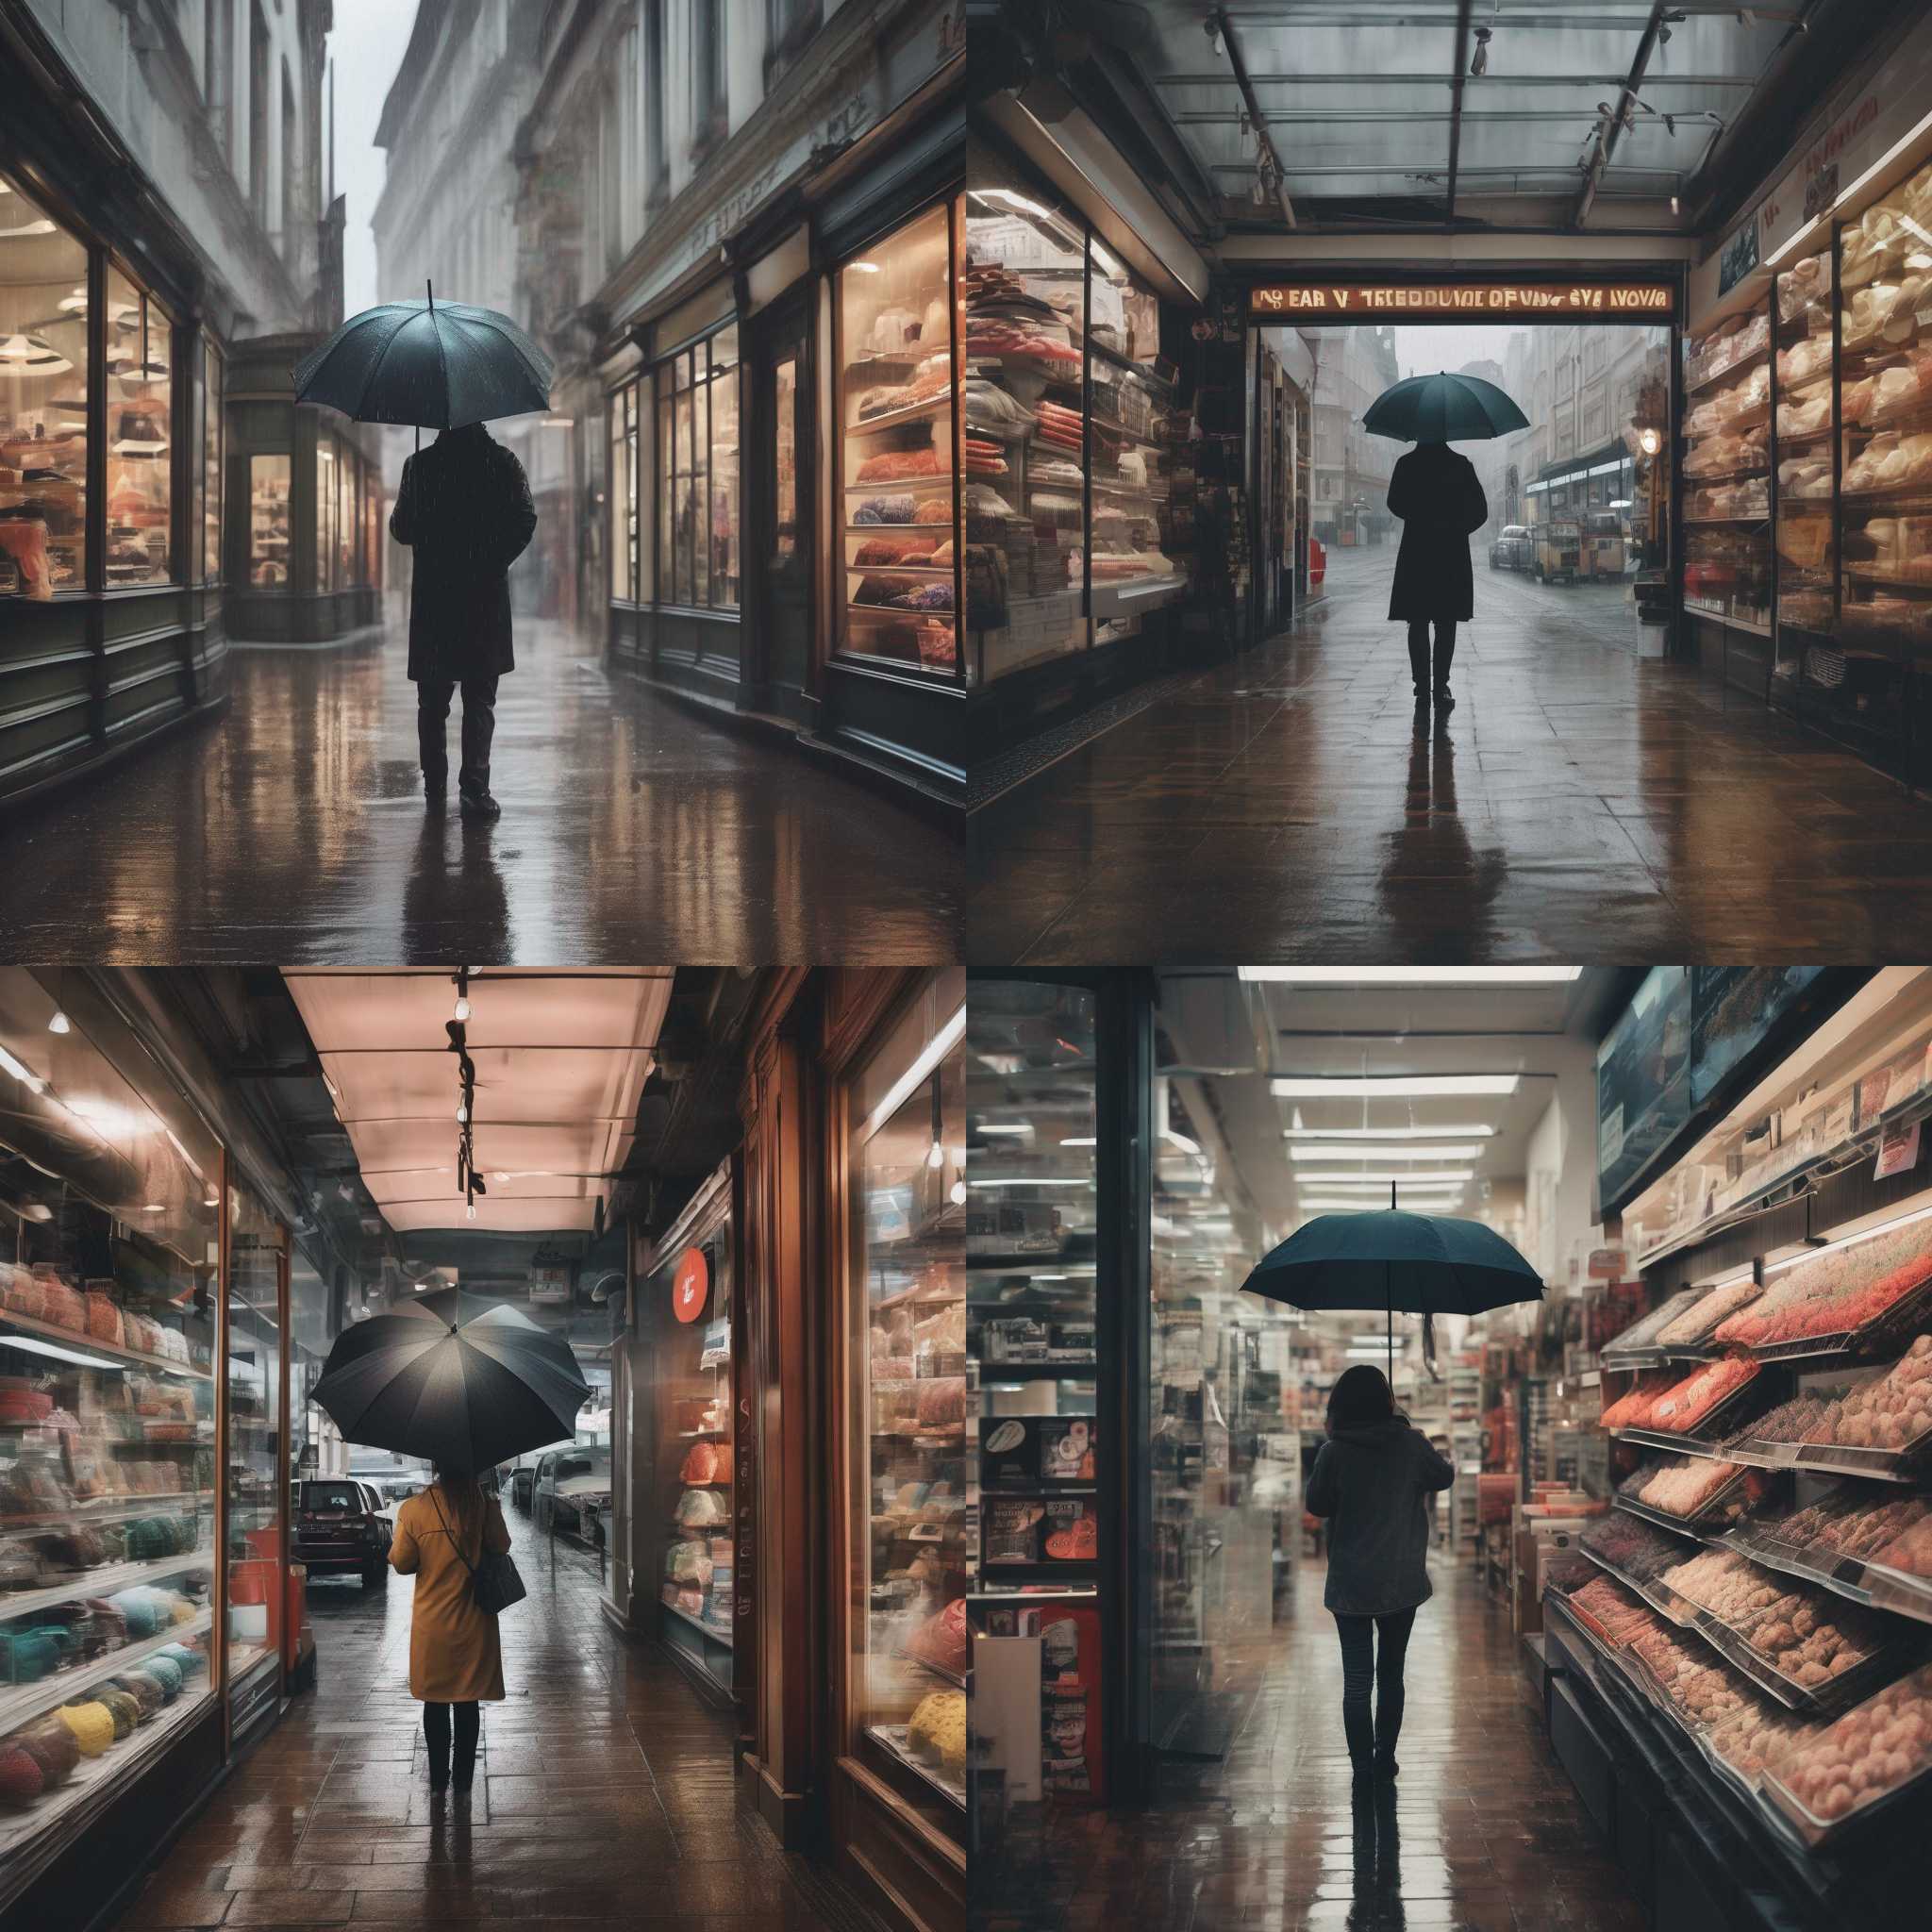 A person with an umbrella in a shop on a rainy day